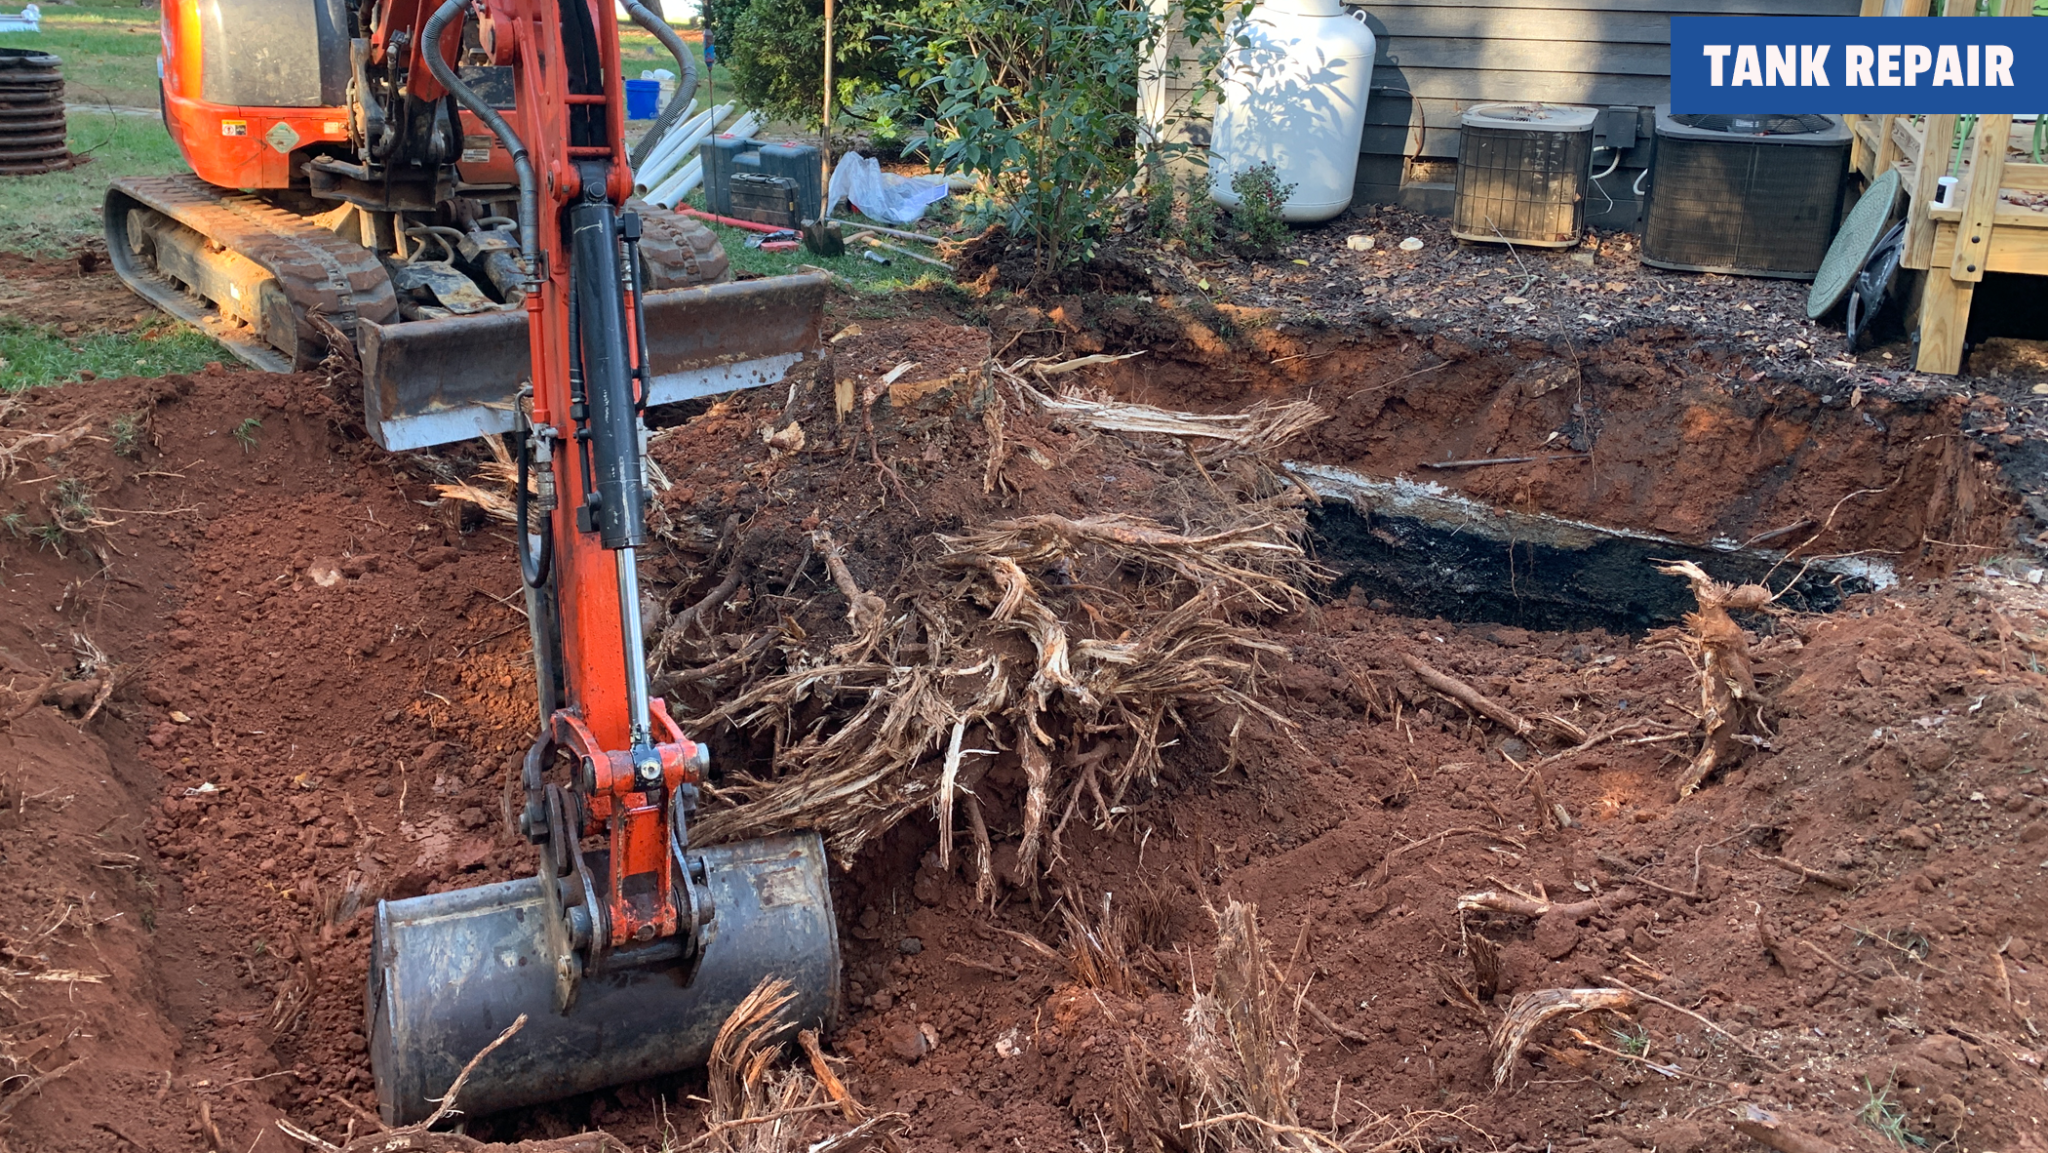 TW Ammons Septic - Removing a large tree stump during the crush and fill of an old septic tank.